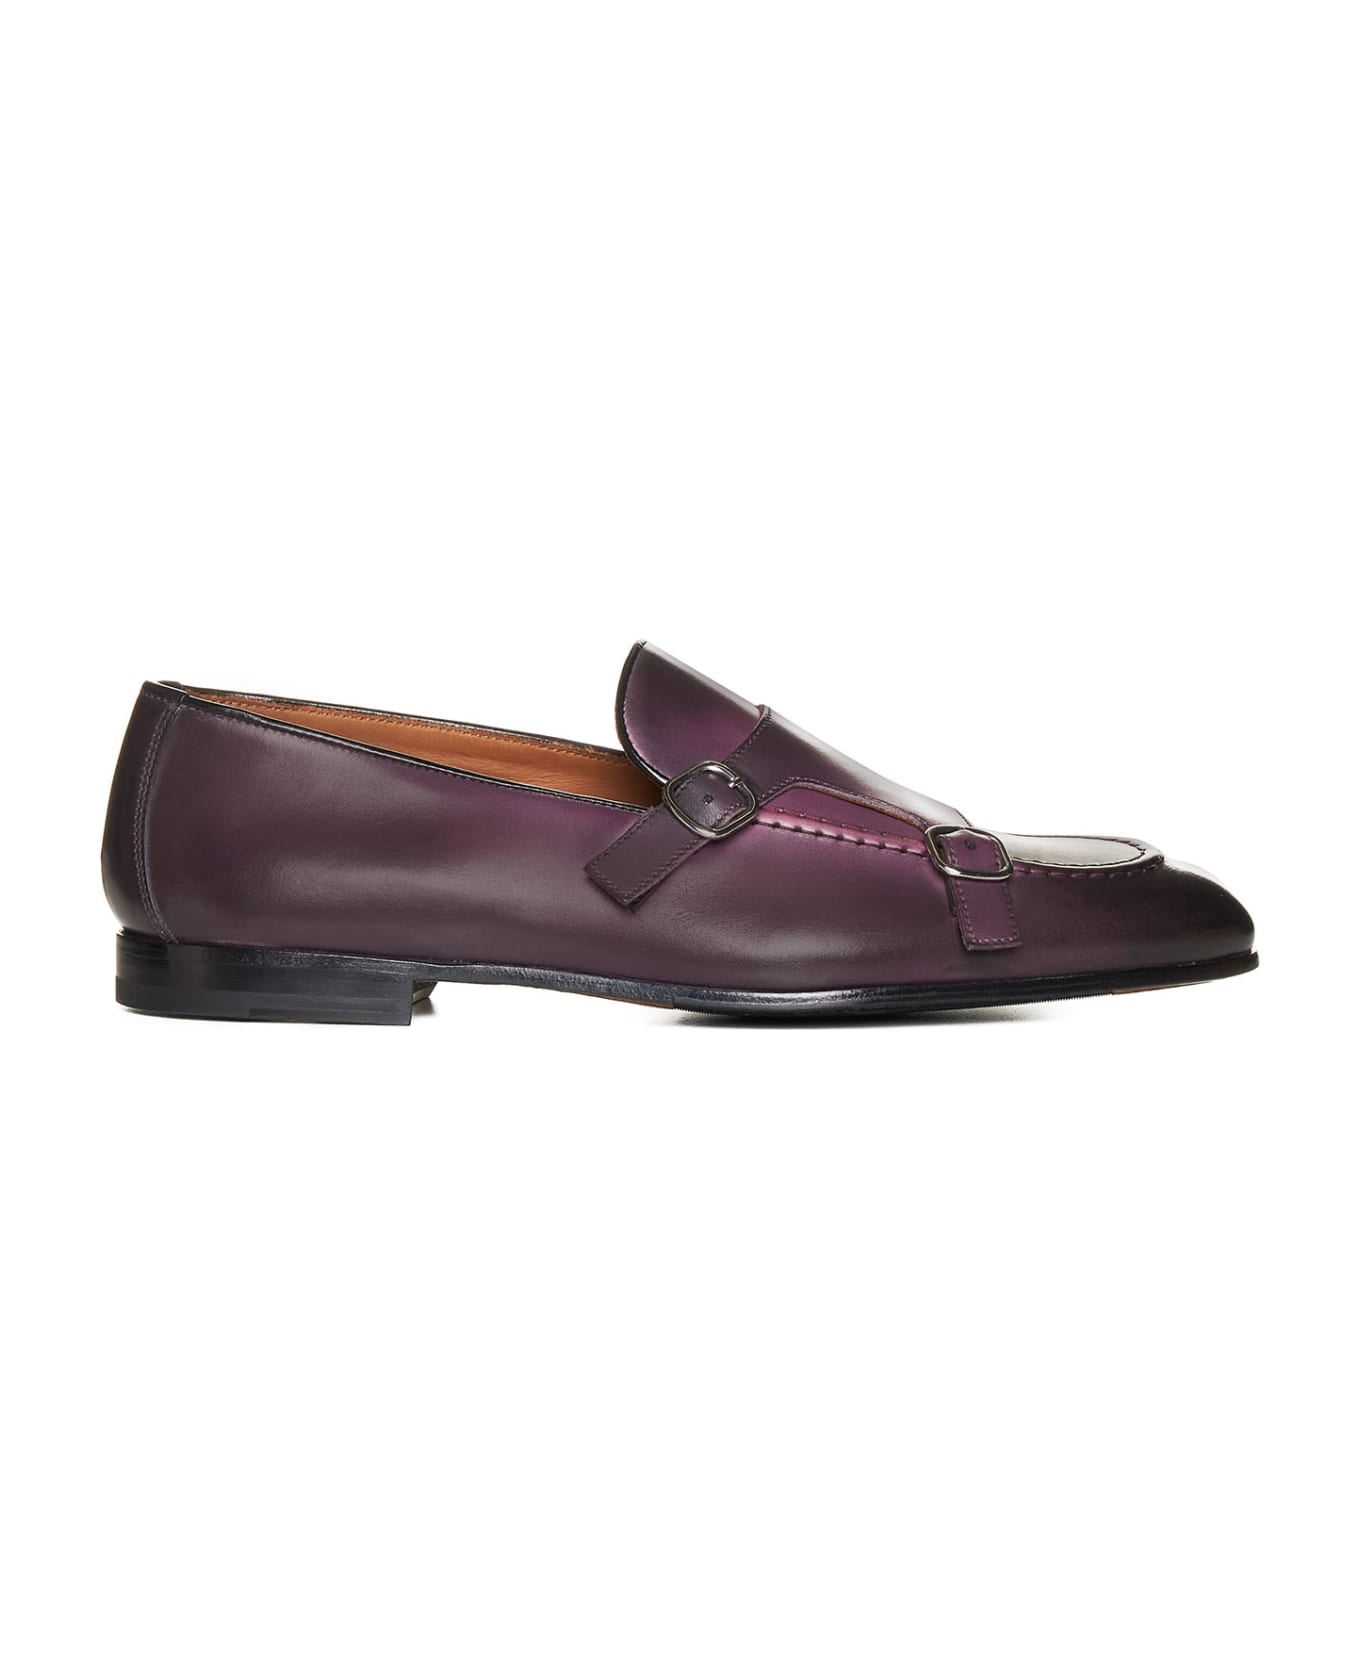 Doucal's Loafers - Rosa+f.do nero